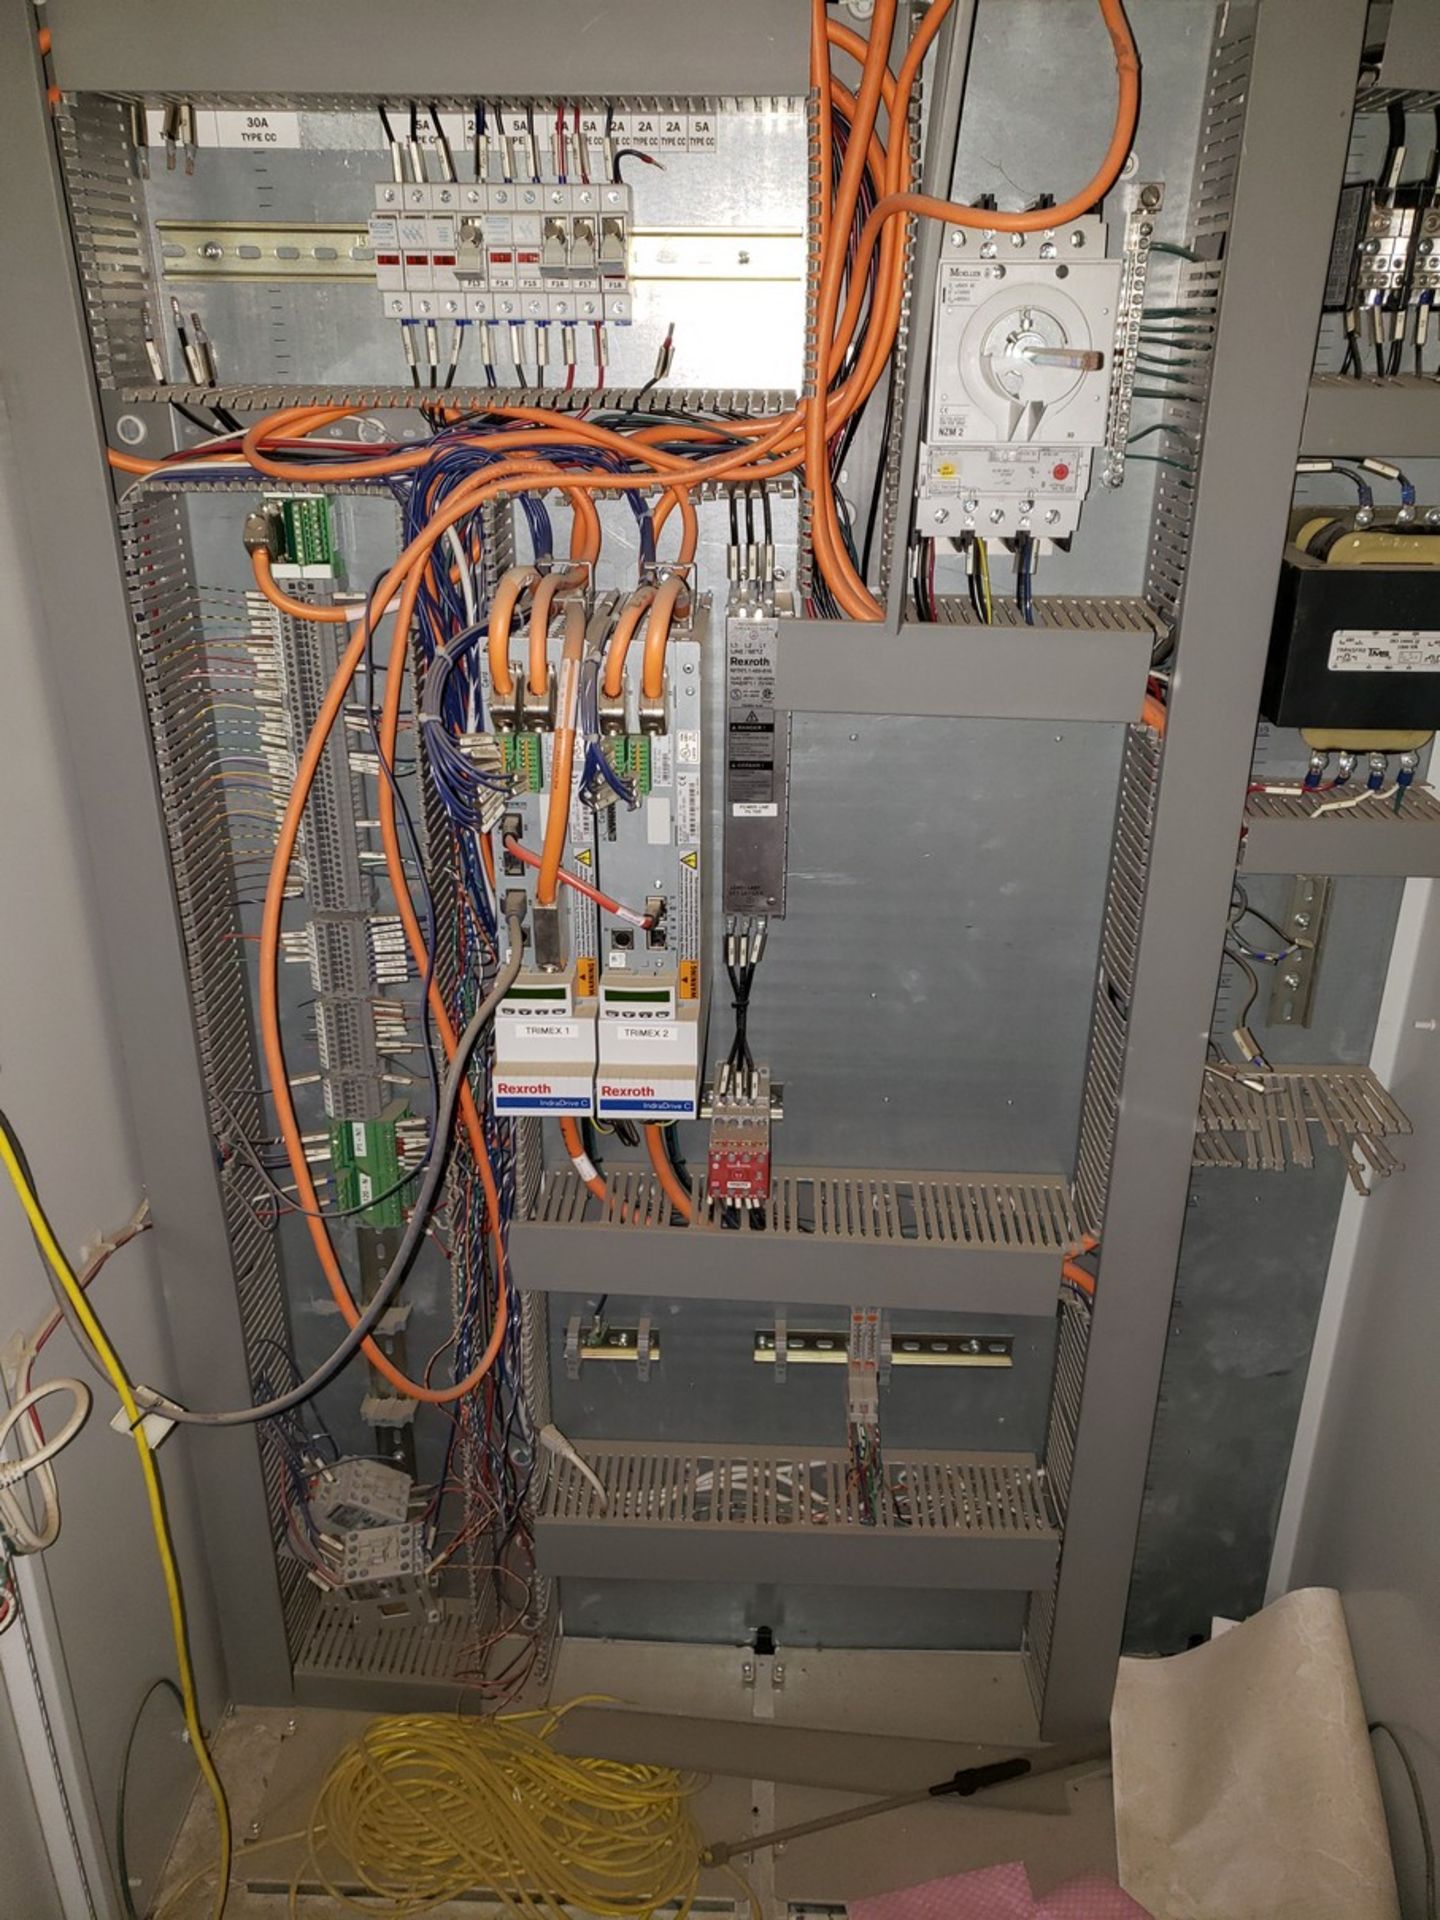 RITTAL ELECTRICAL ENCLOSURE WITH COMPONENTS AND CABLES, REXROTH DRIVES AND CONTRILERS, ALONG WITH - Image 2 of 12